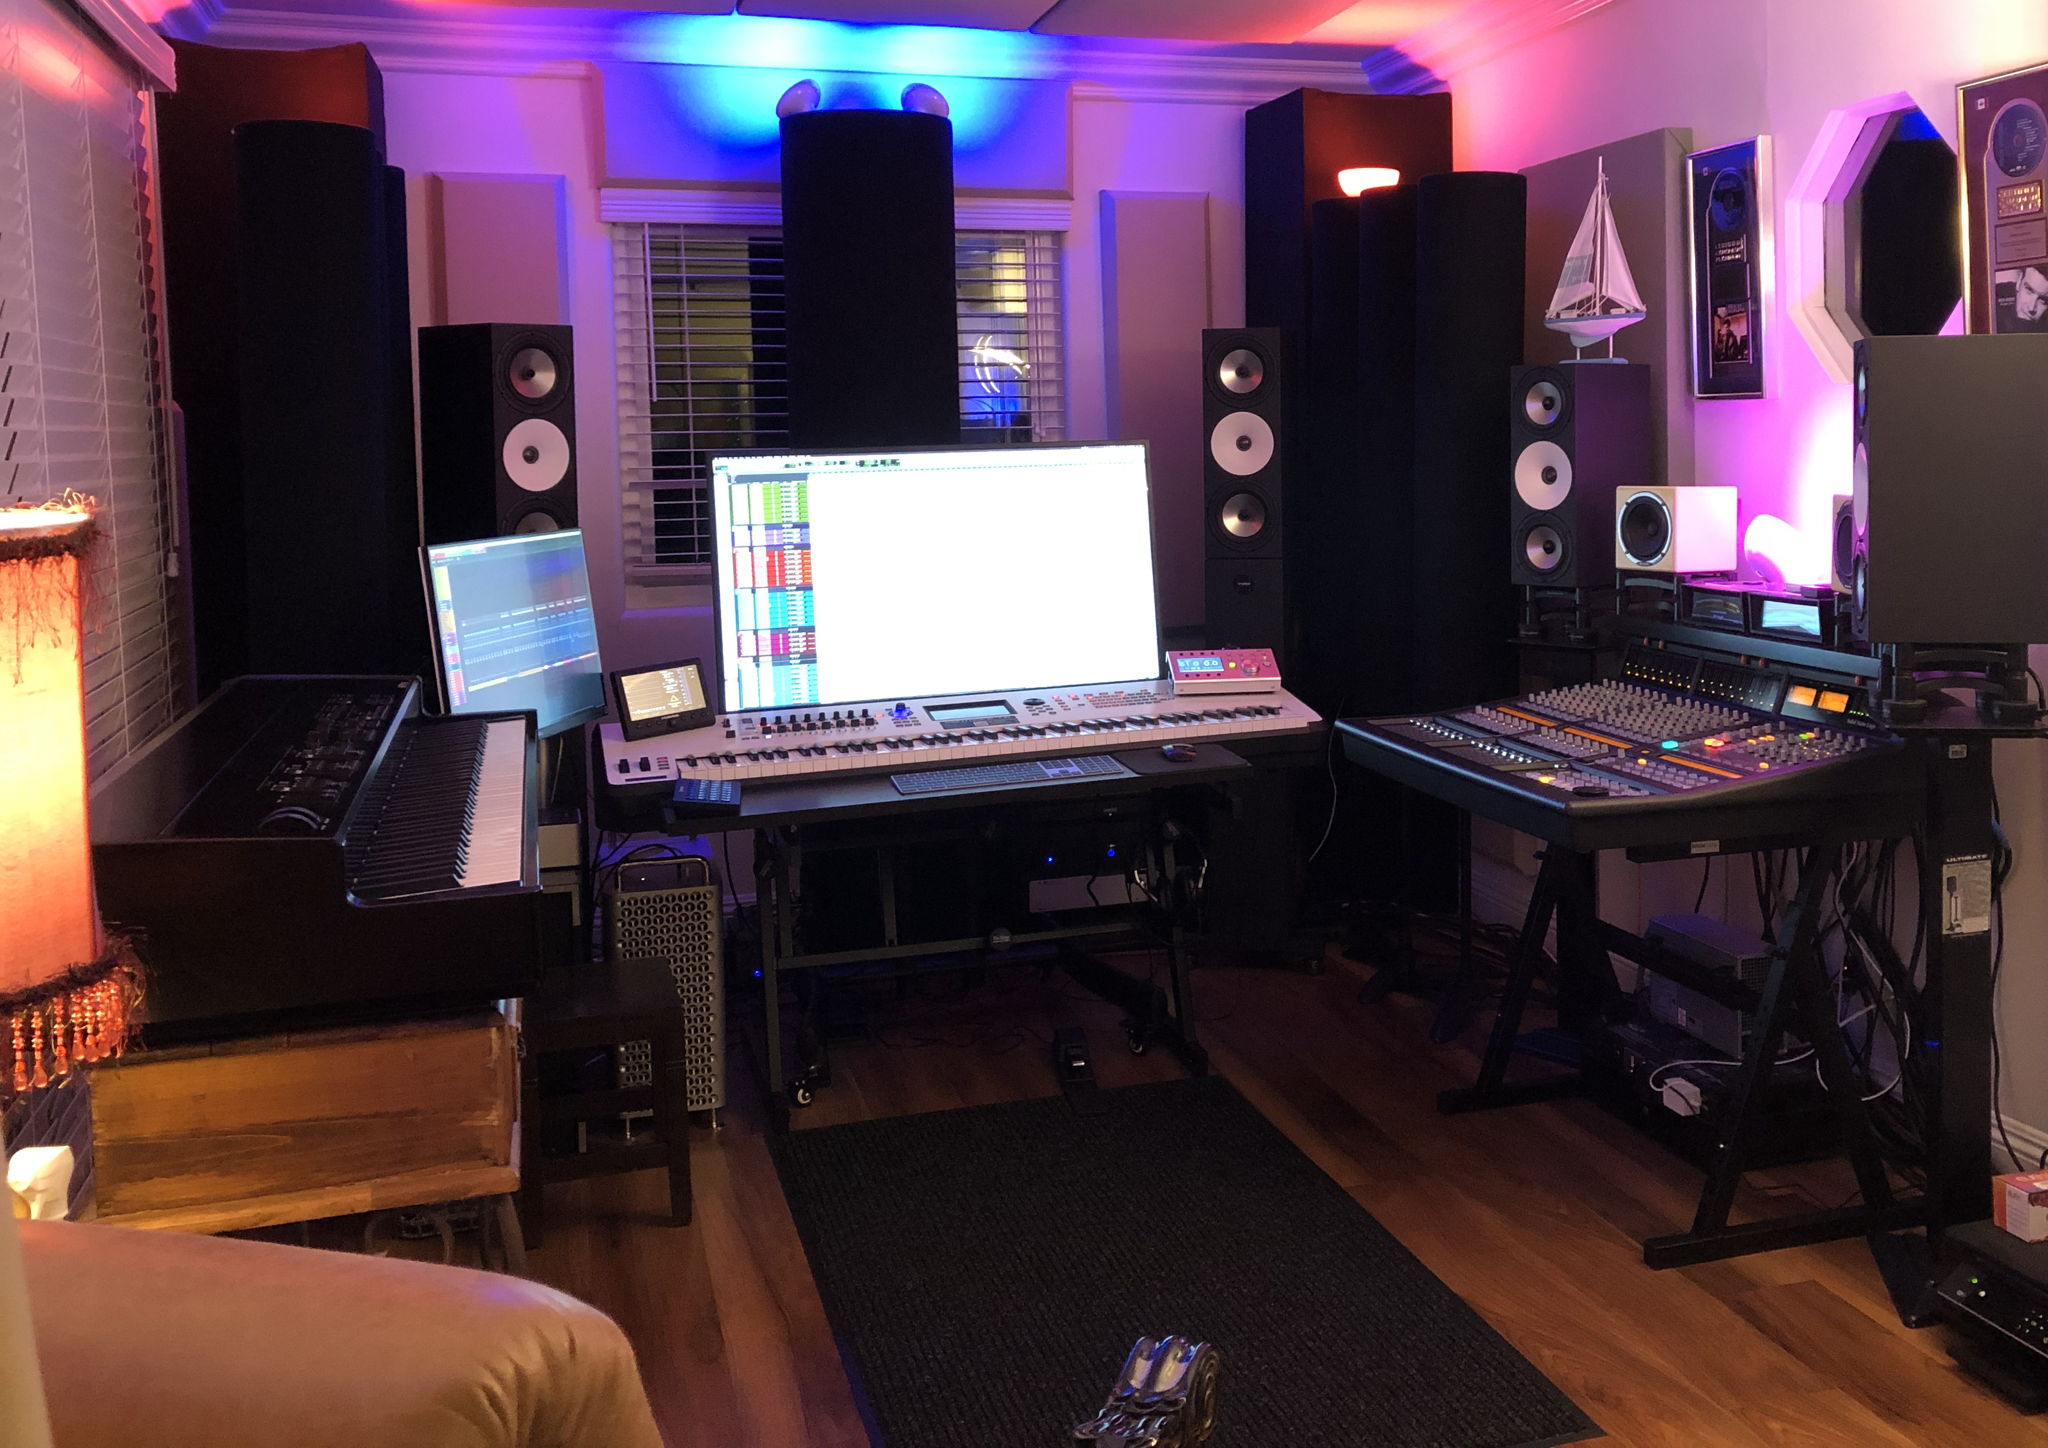 Dean uses Amphion Two15 monitors and an Amphion Two18-BaseOne25 Bass Extension System